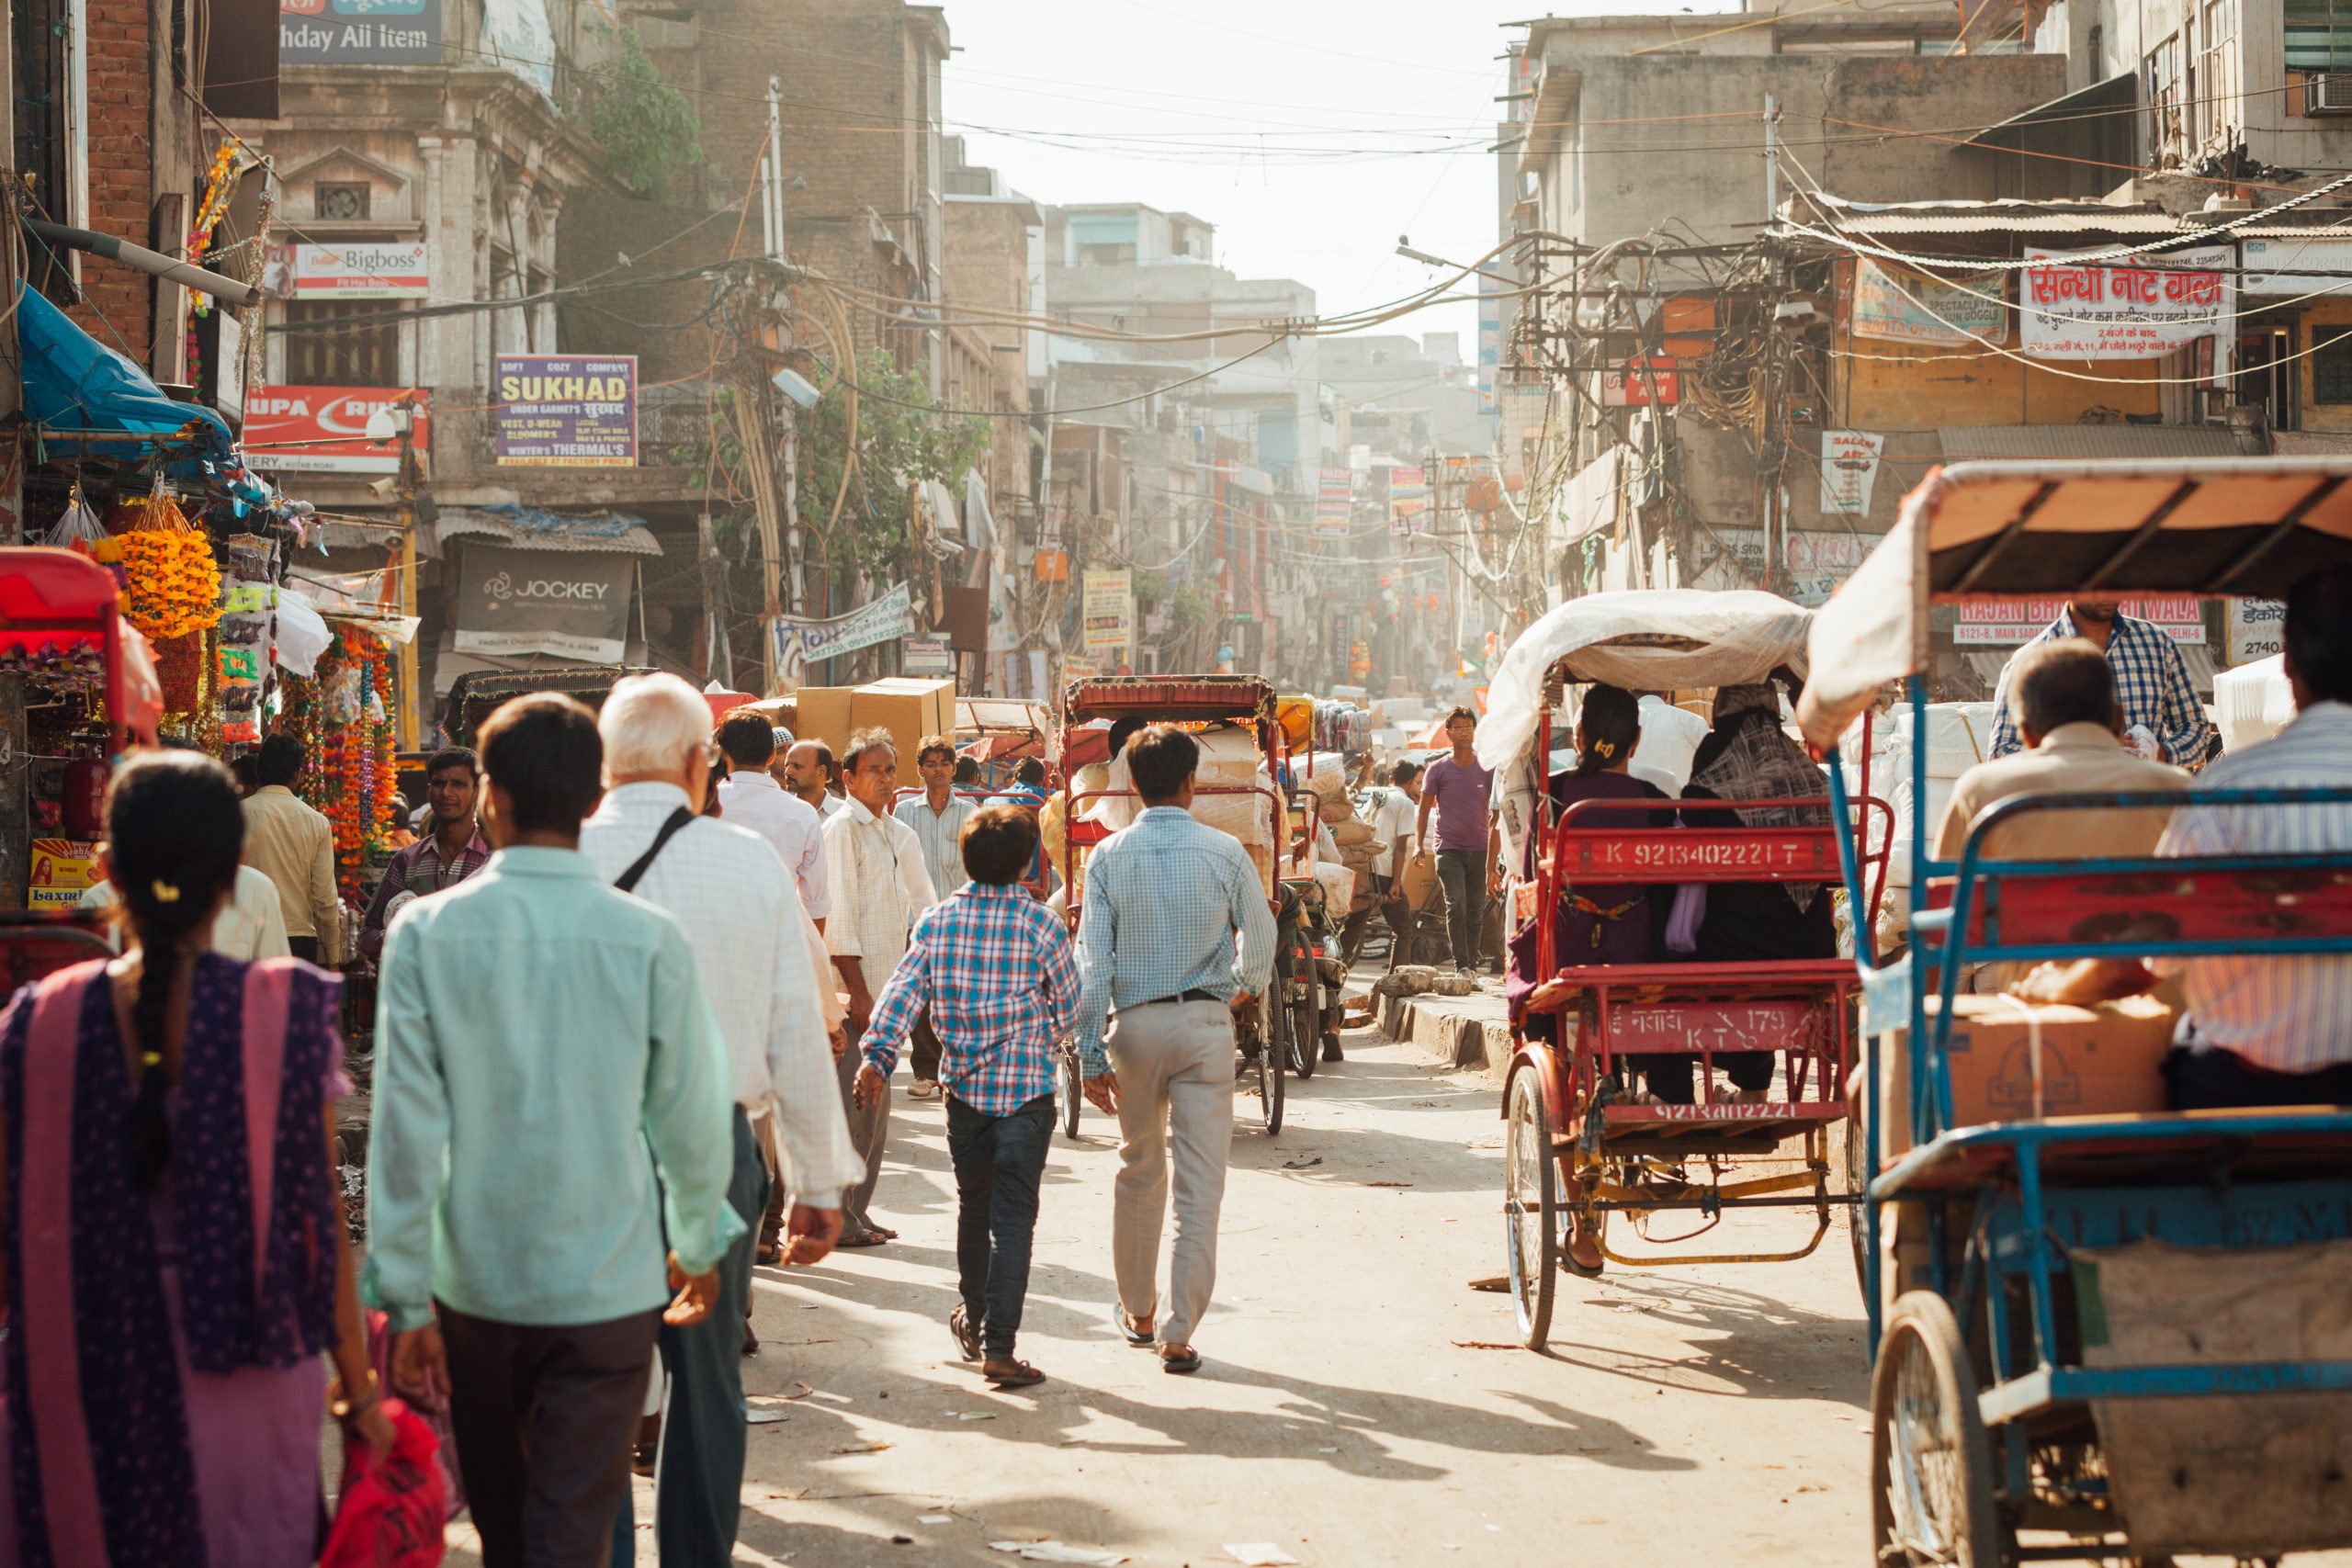 Listen To The Fascinating Stories Behind Old Delhi Streets In Our Old Delhi Tour